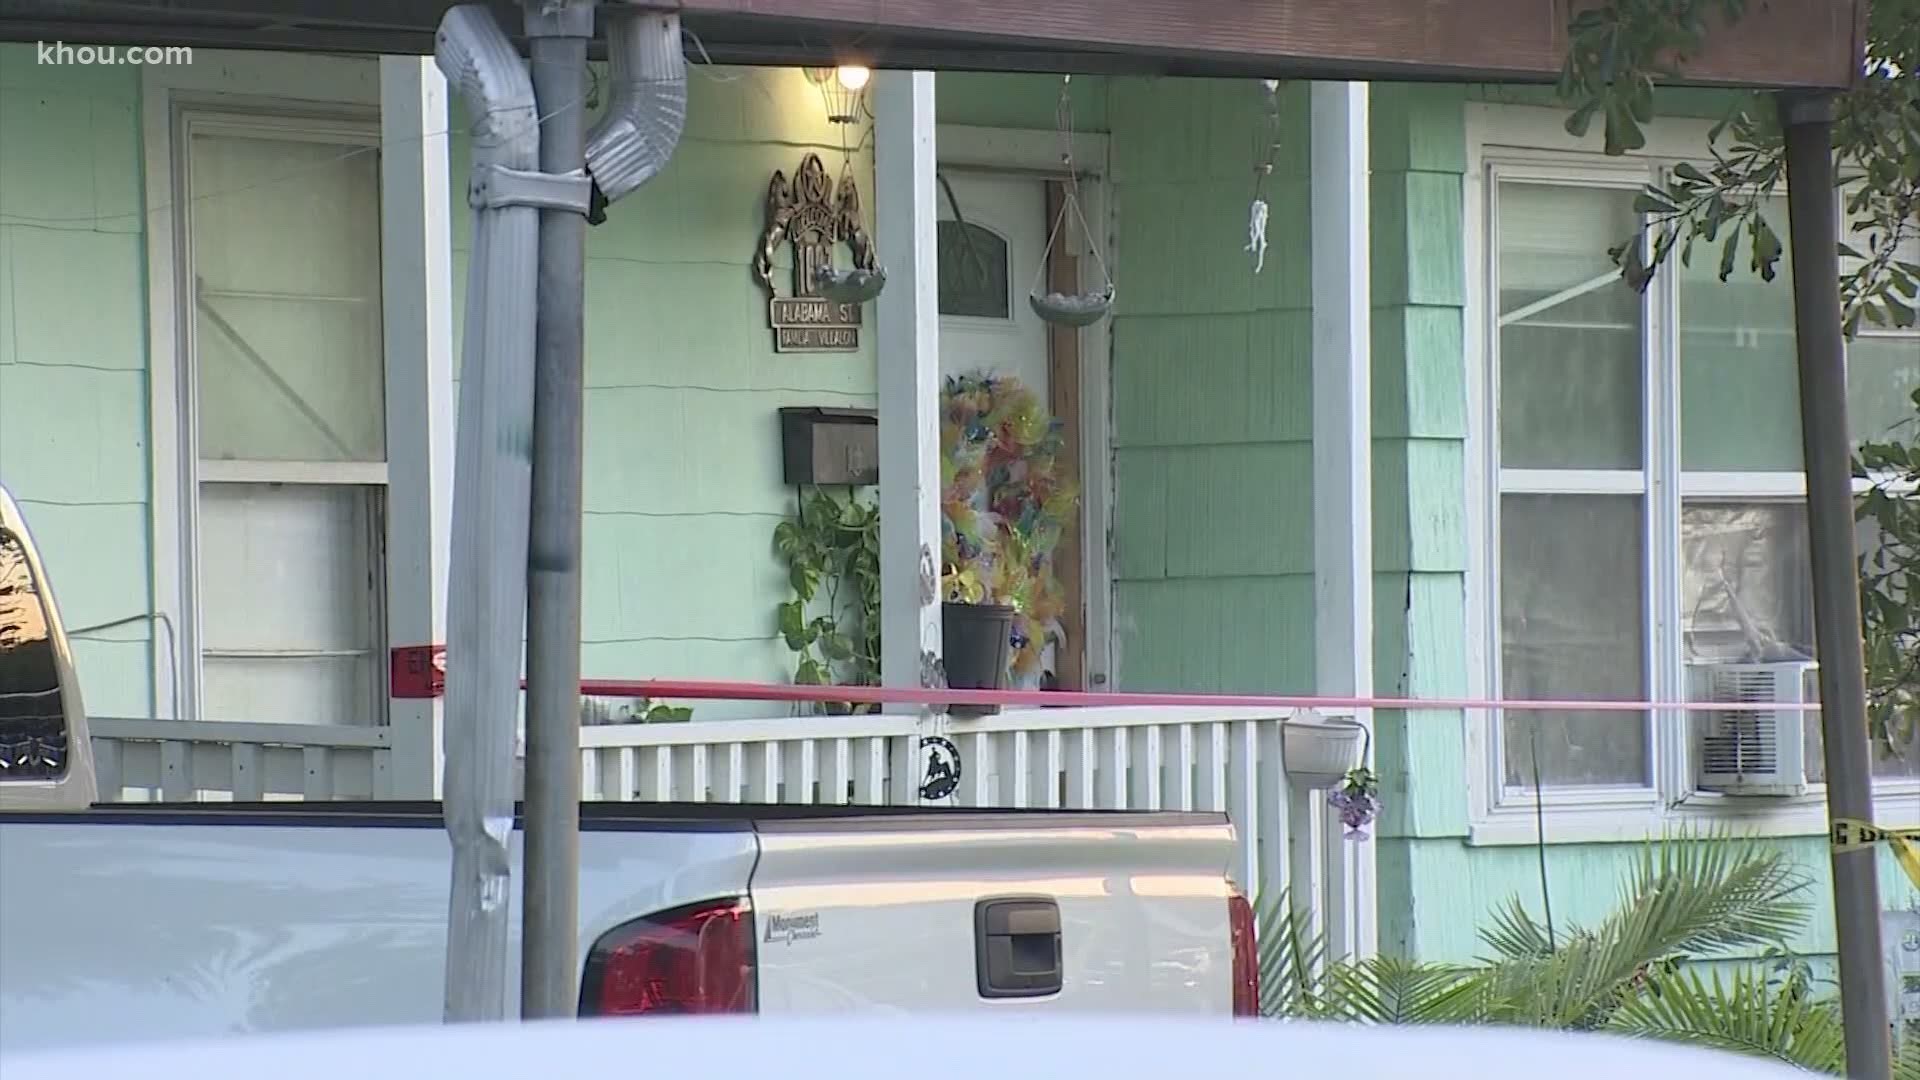 Authorities have detained two persons of interests in the murder of a Baytown woman killed while her two children were being confronted by home invaders.